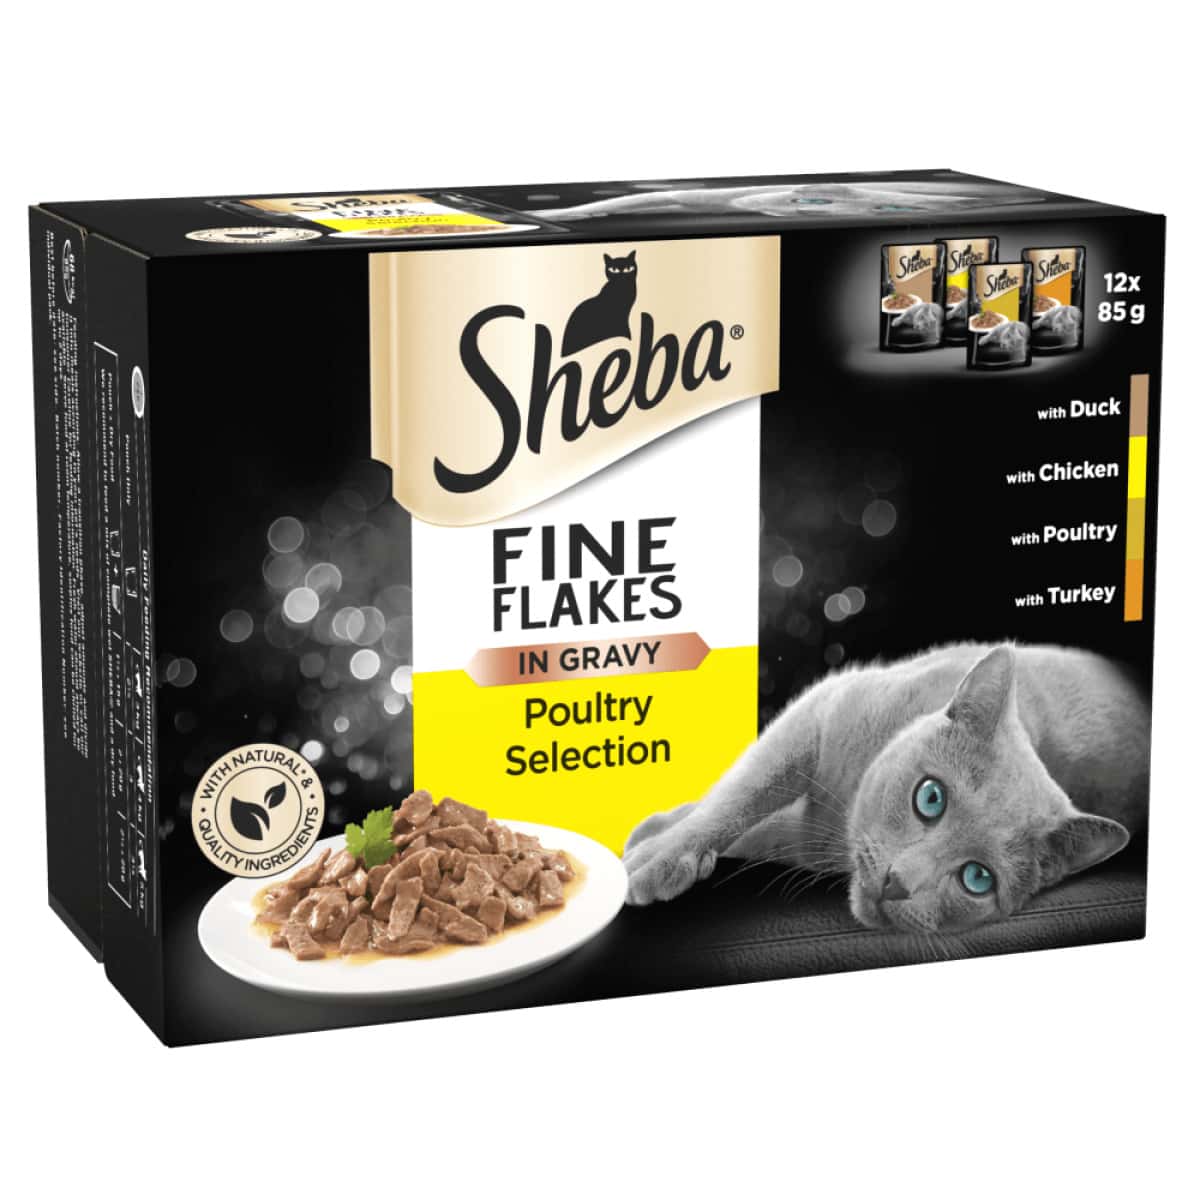 Sheba Fine Flakes Poultry in Gravy 12 x 85g Main Image